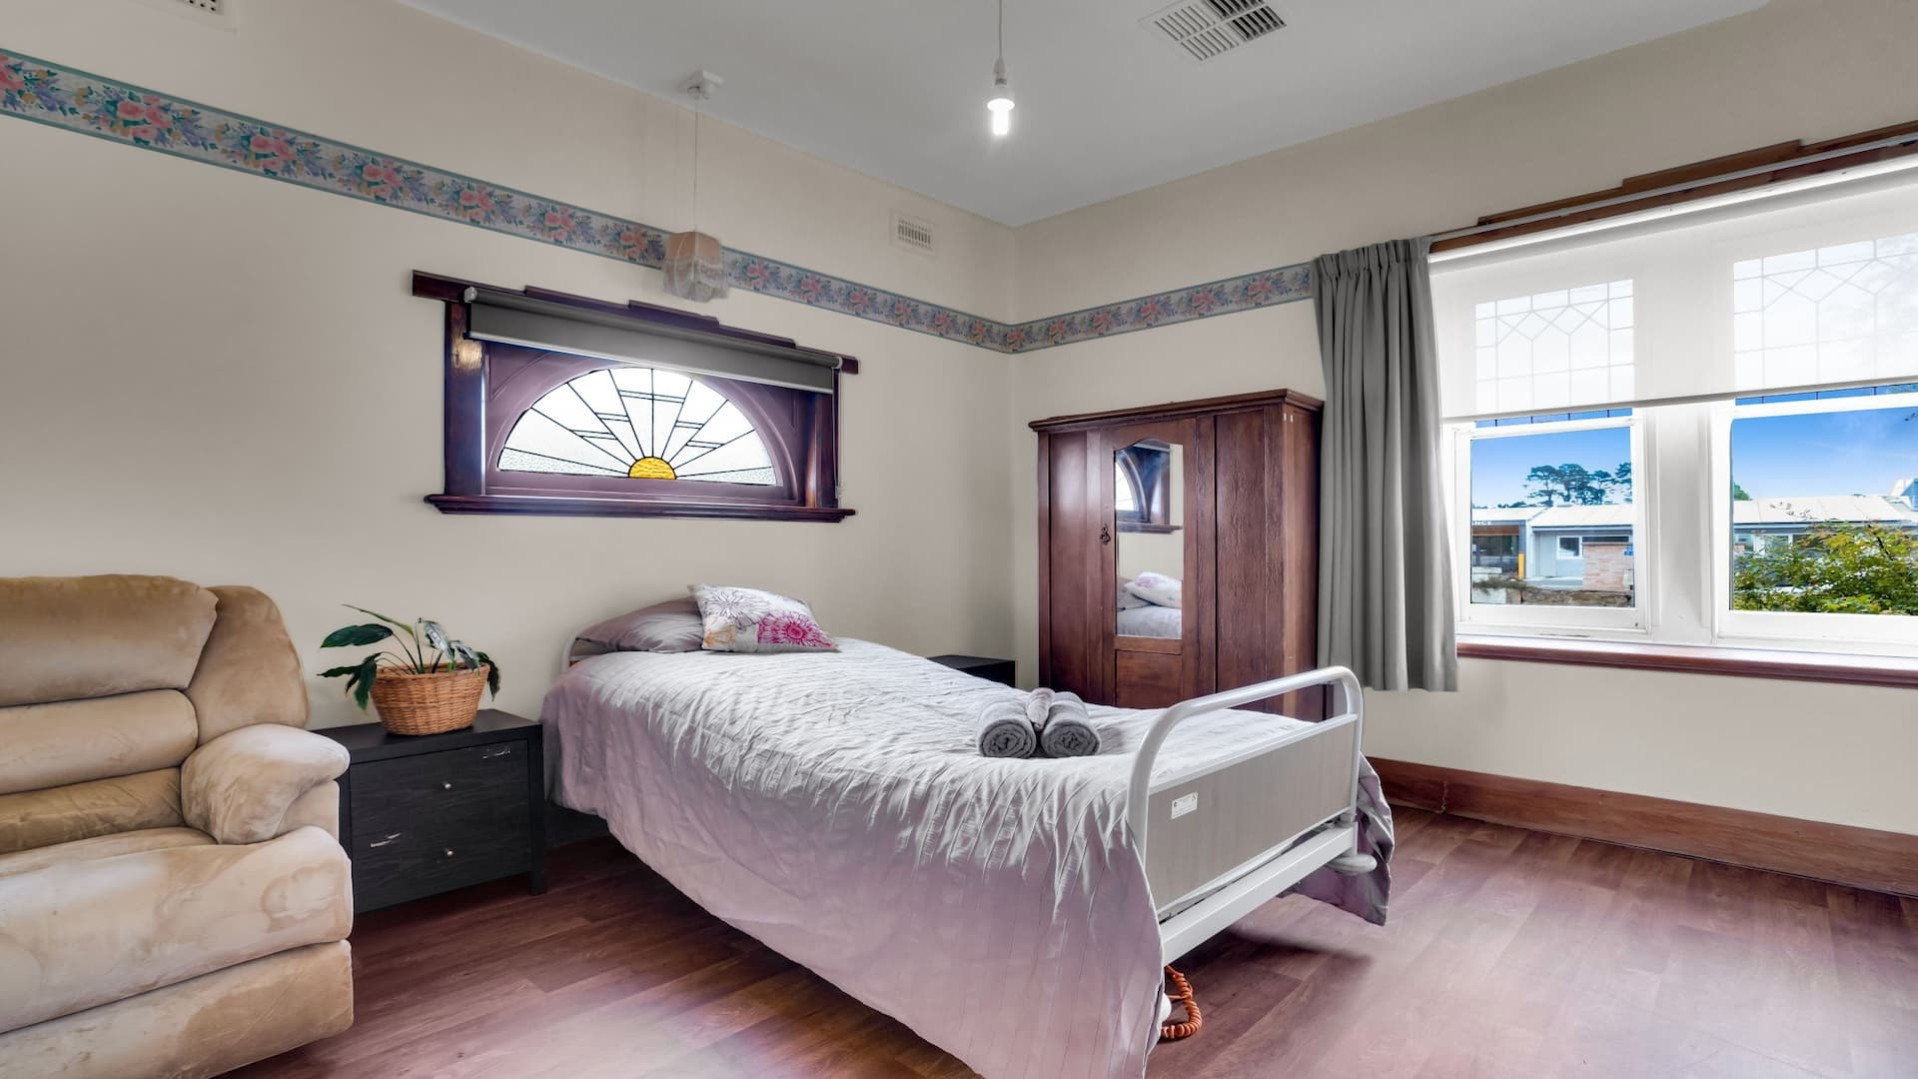 beautifully presented spacious bedroom with stained glass window, wooden free standing wardrobe, bed, side table and armchair.